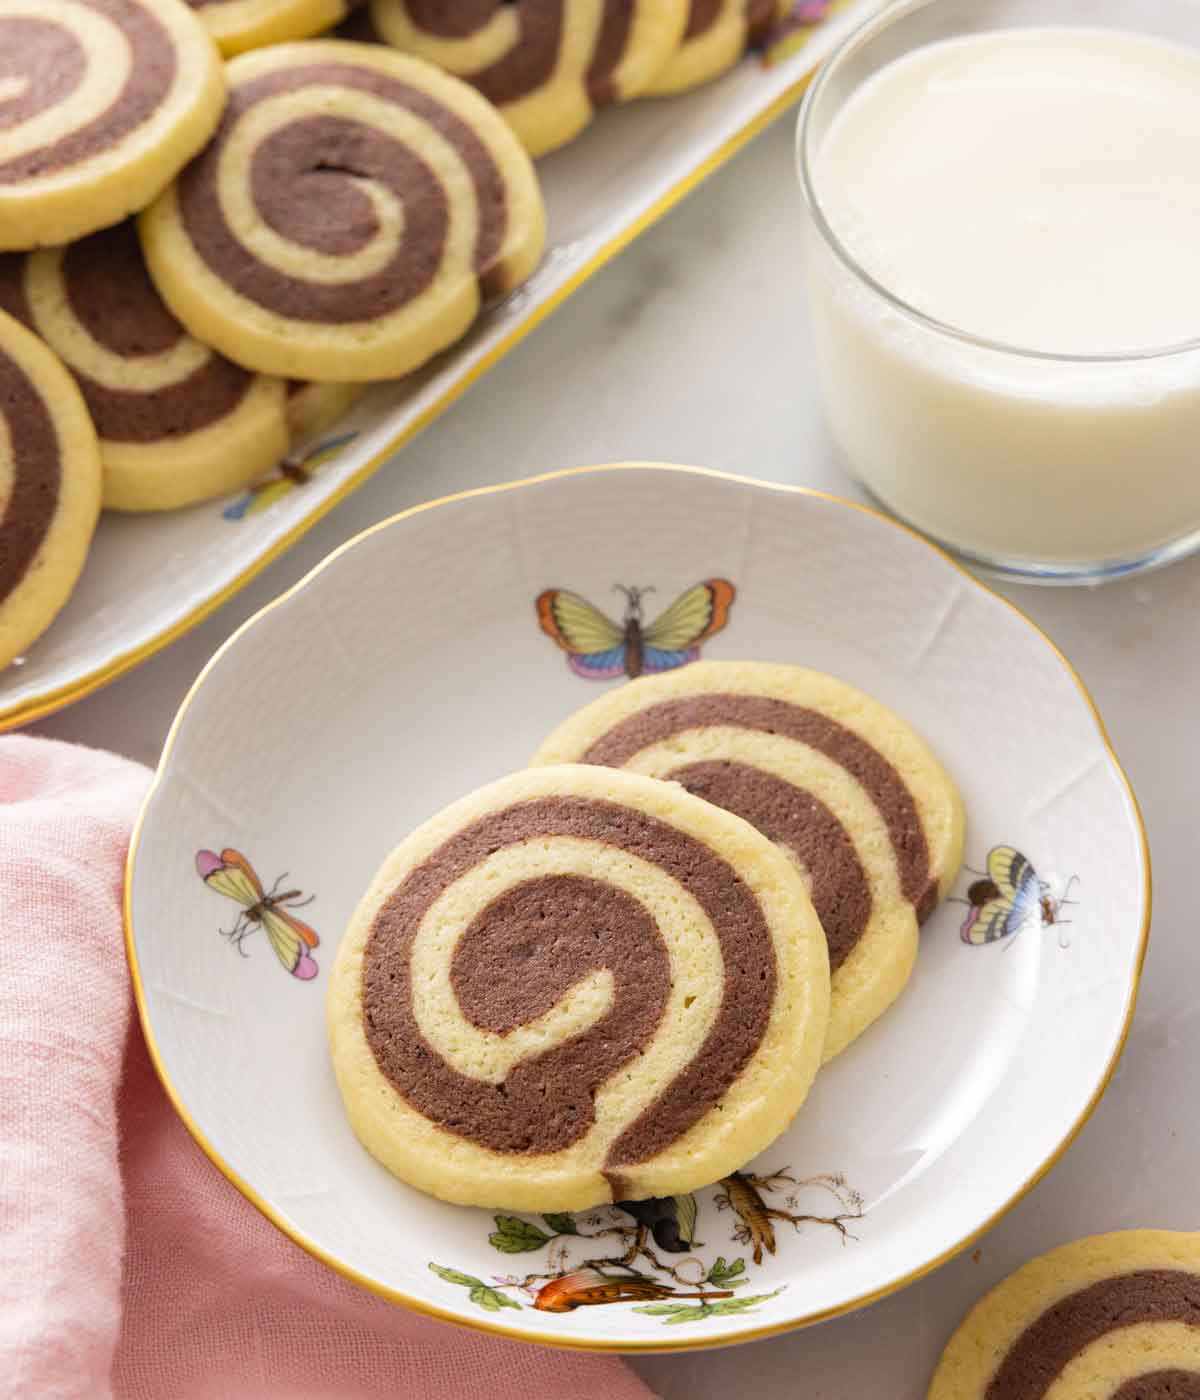 A plate with two pinwheel cookies by a glass of milk.